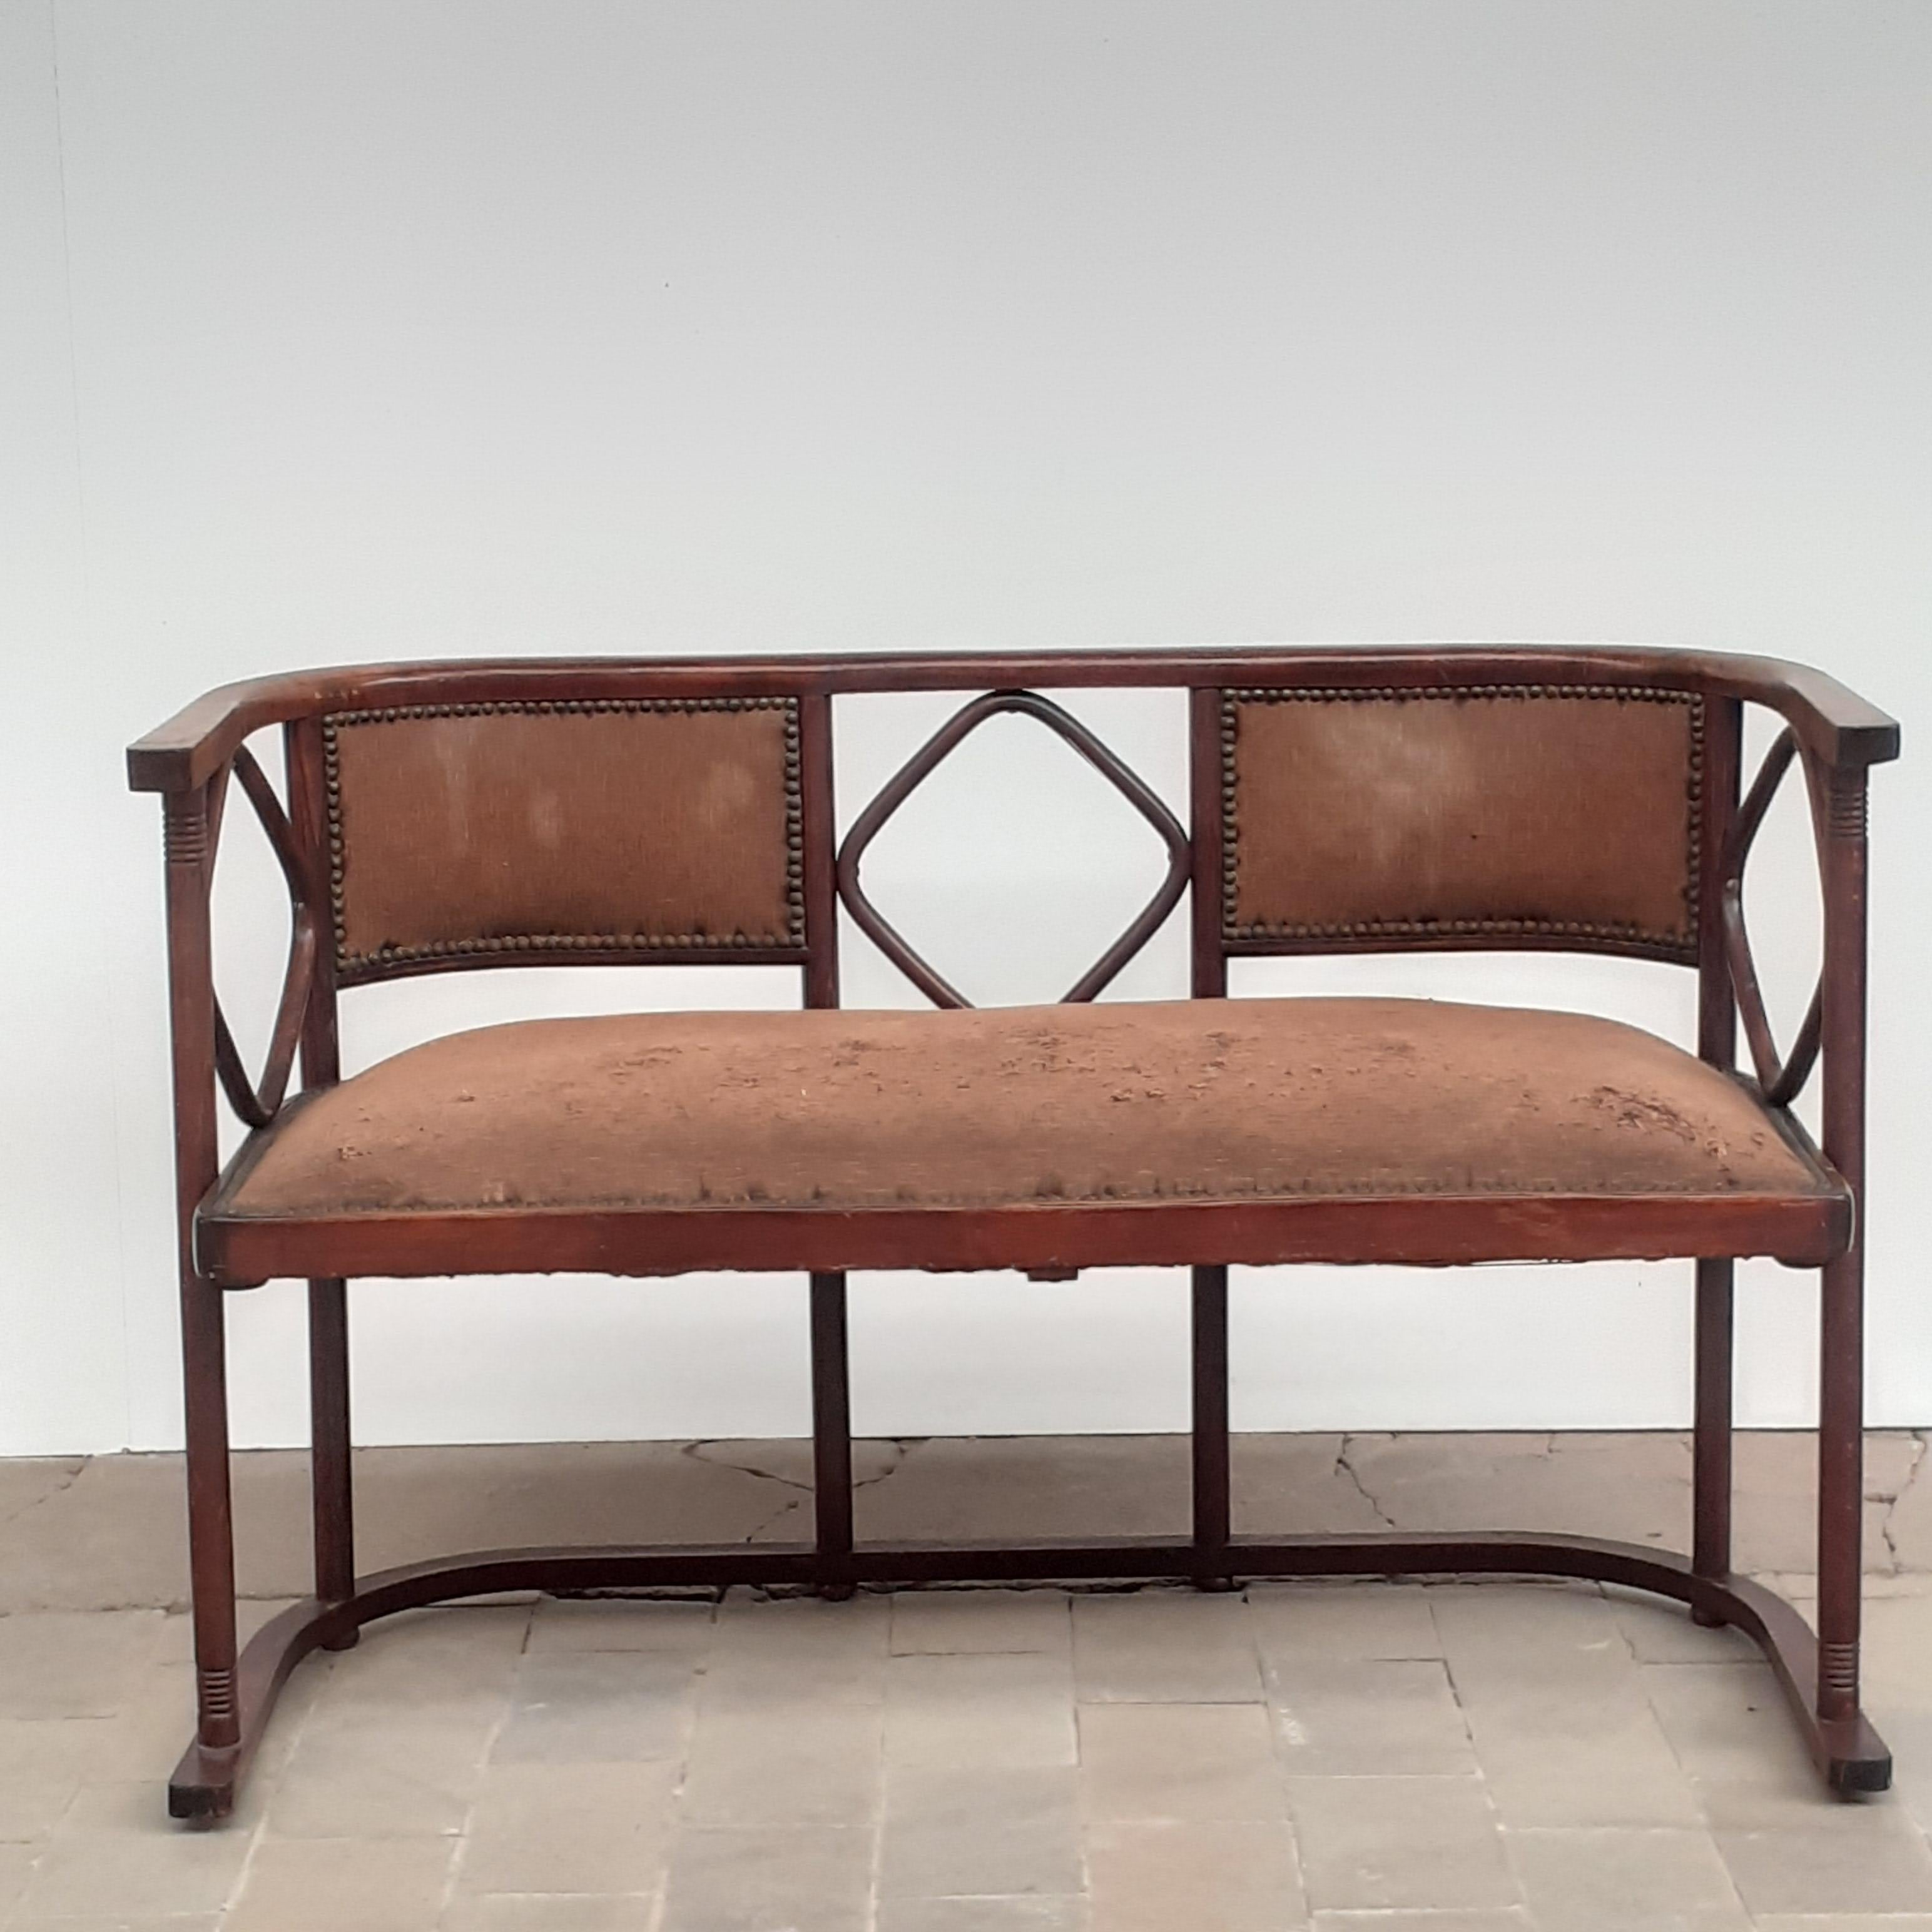 20th Century Rare Josef Hoffmann Set of 2 Armchairs, 2 Chairs and a Bench, 1907 For Sale